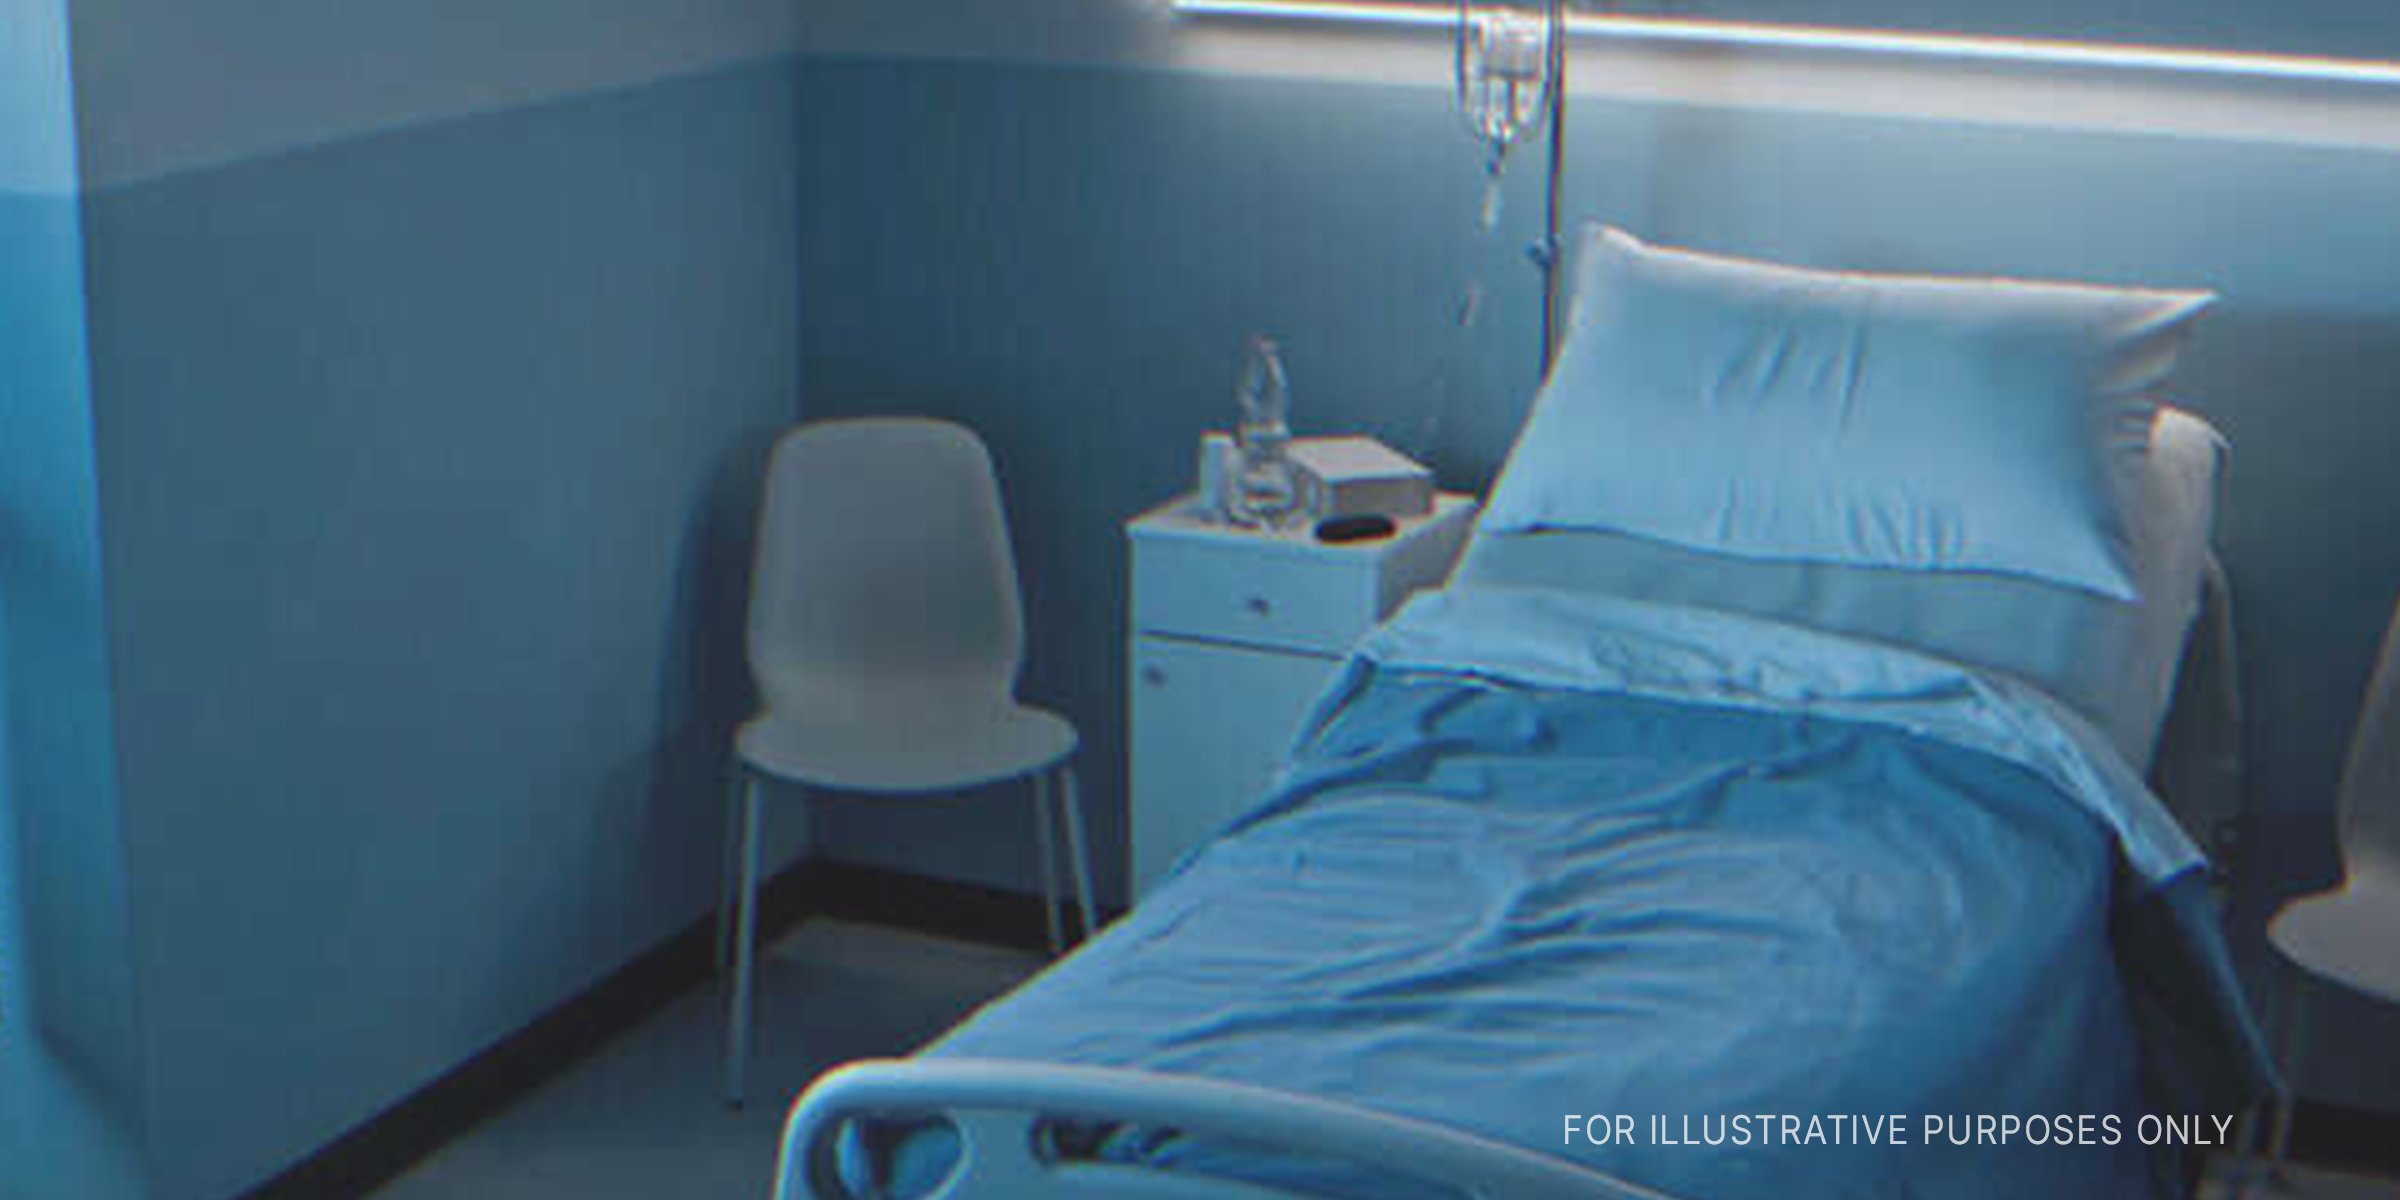 An empty hospital bed at night | Shutterstock